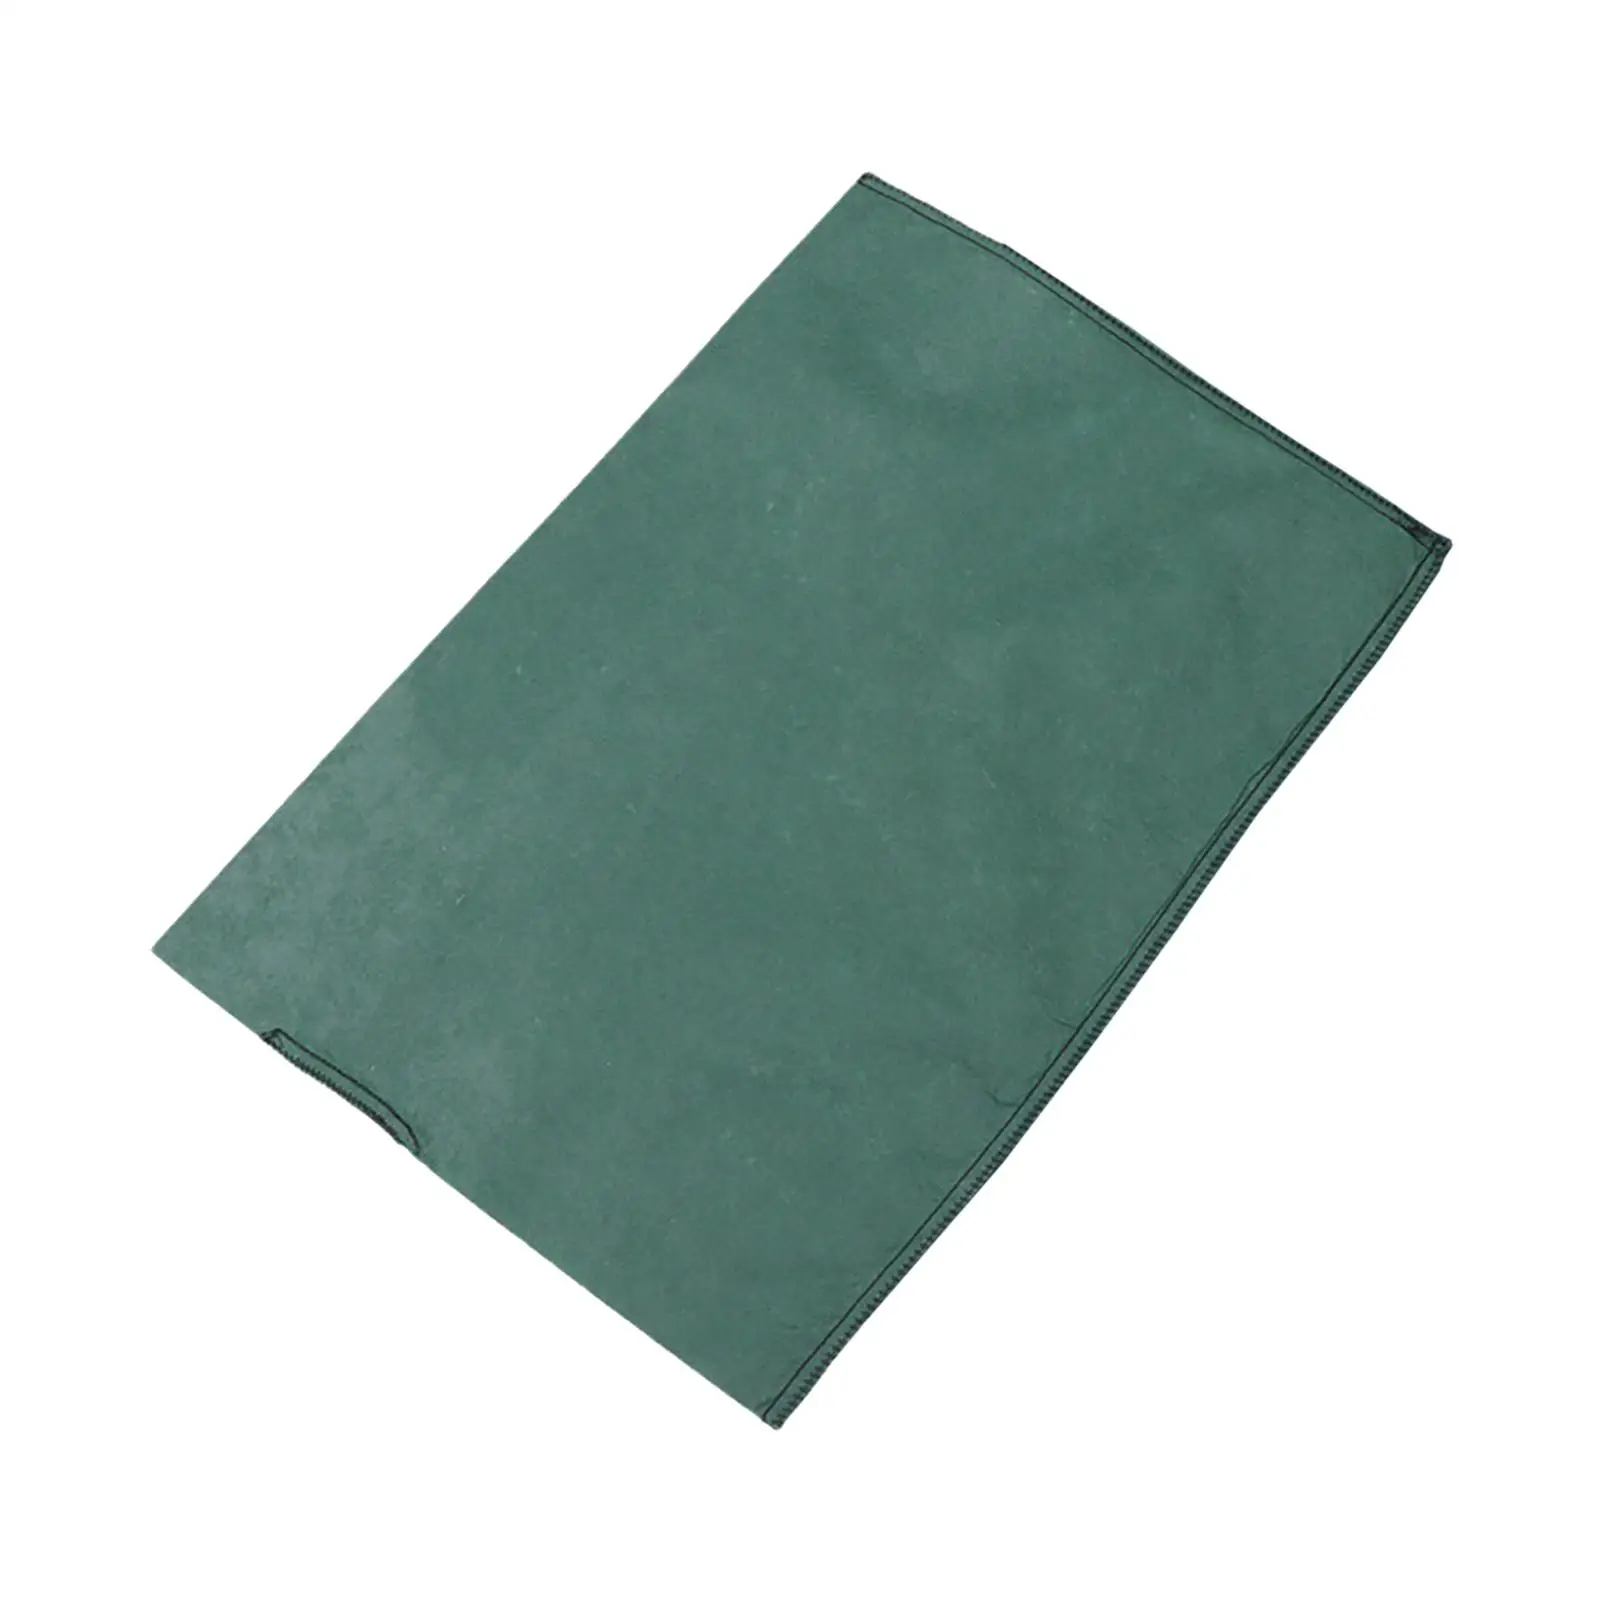 Water Barriers Sandless Bags for Garage Basement Protection Water Absorbent Sandbag Flood Protection Sand Bags